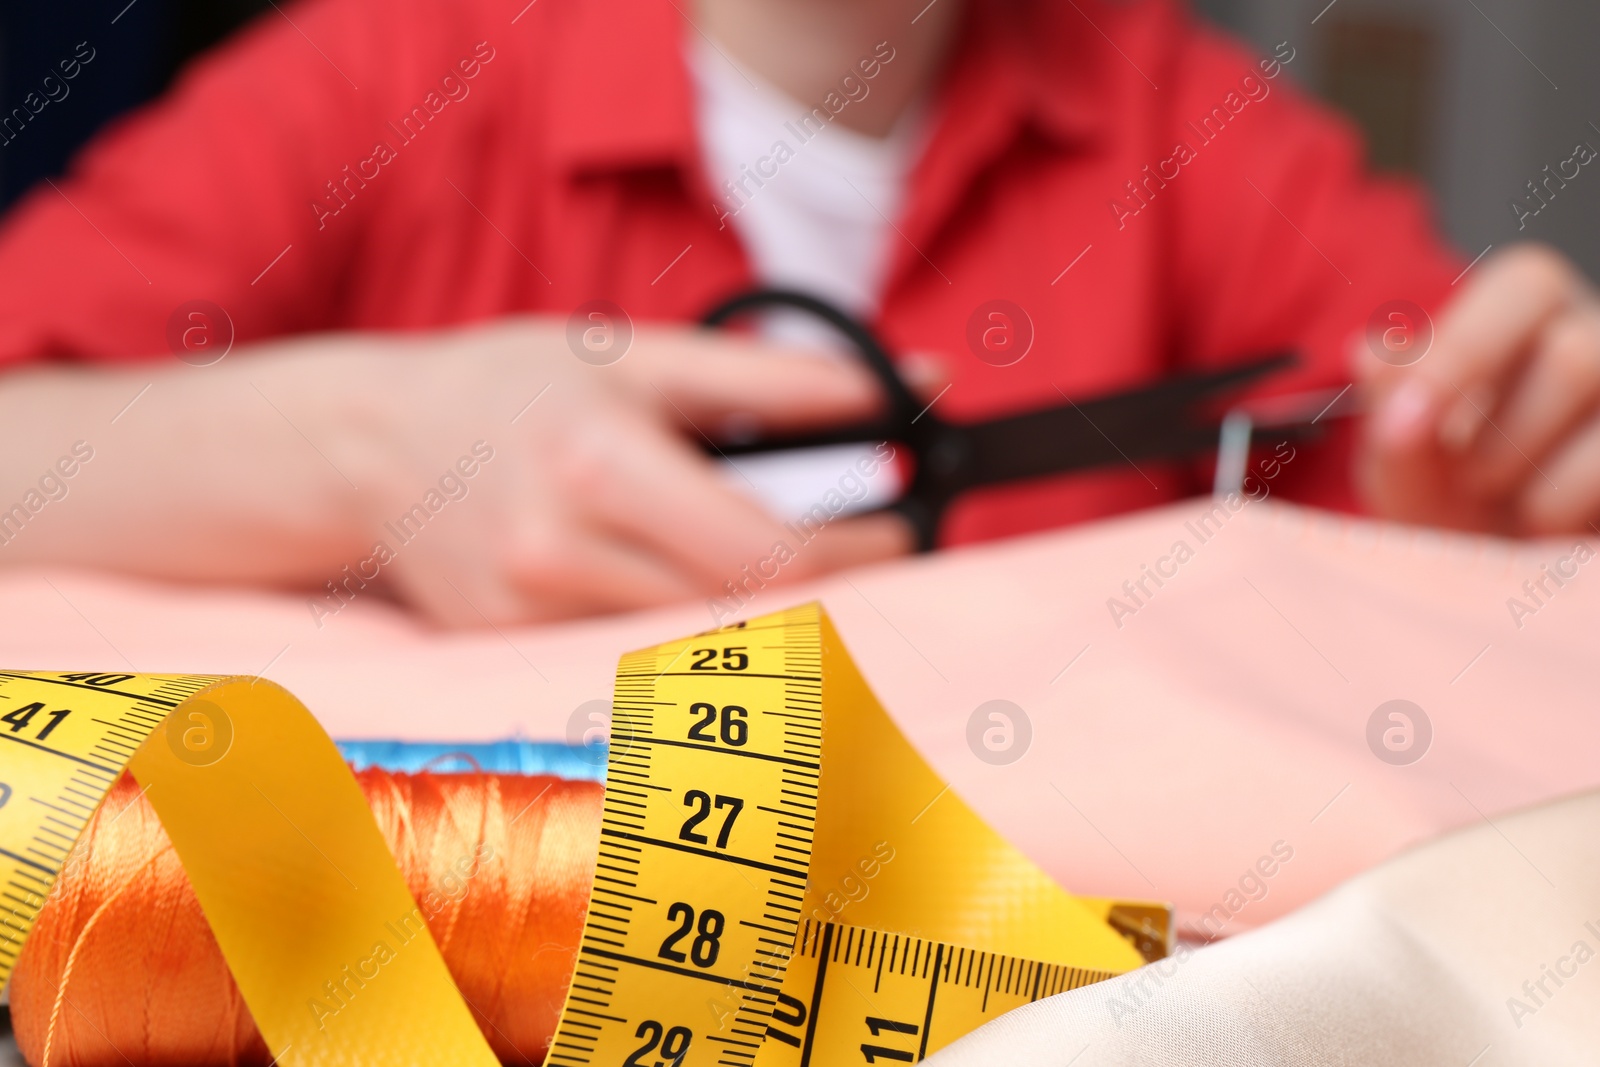 Photo of Woman cutting sewing thread over cloth, focus on measuring tape and spool threads